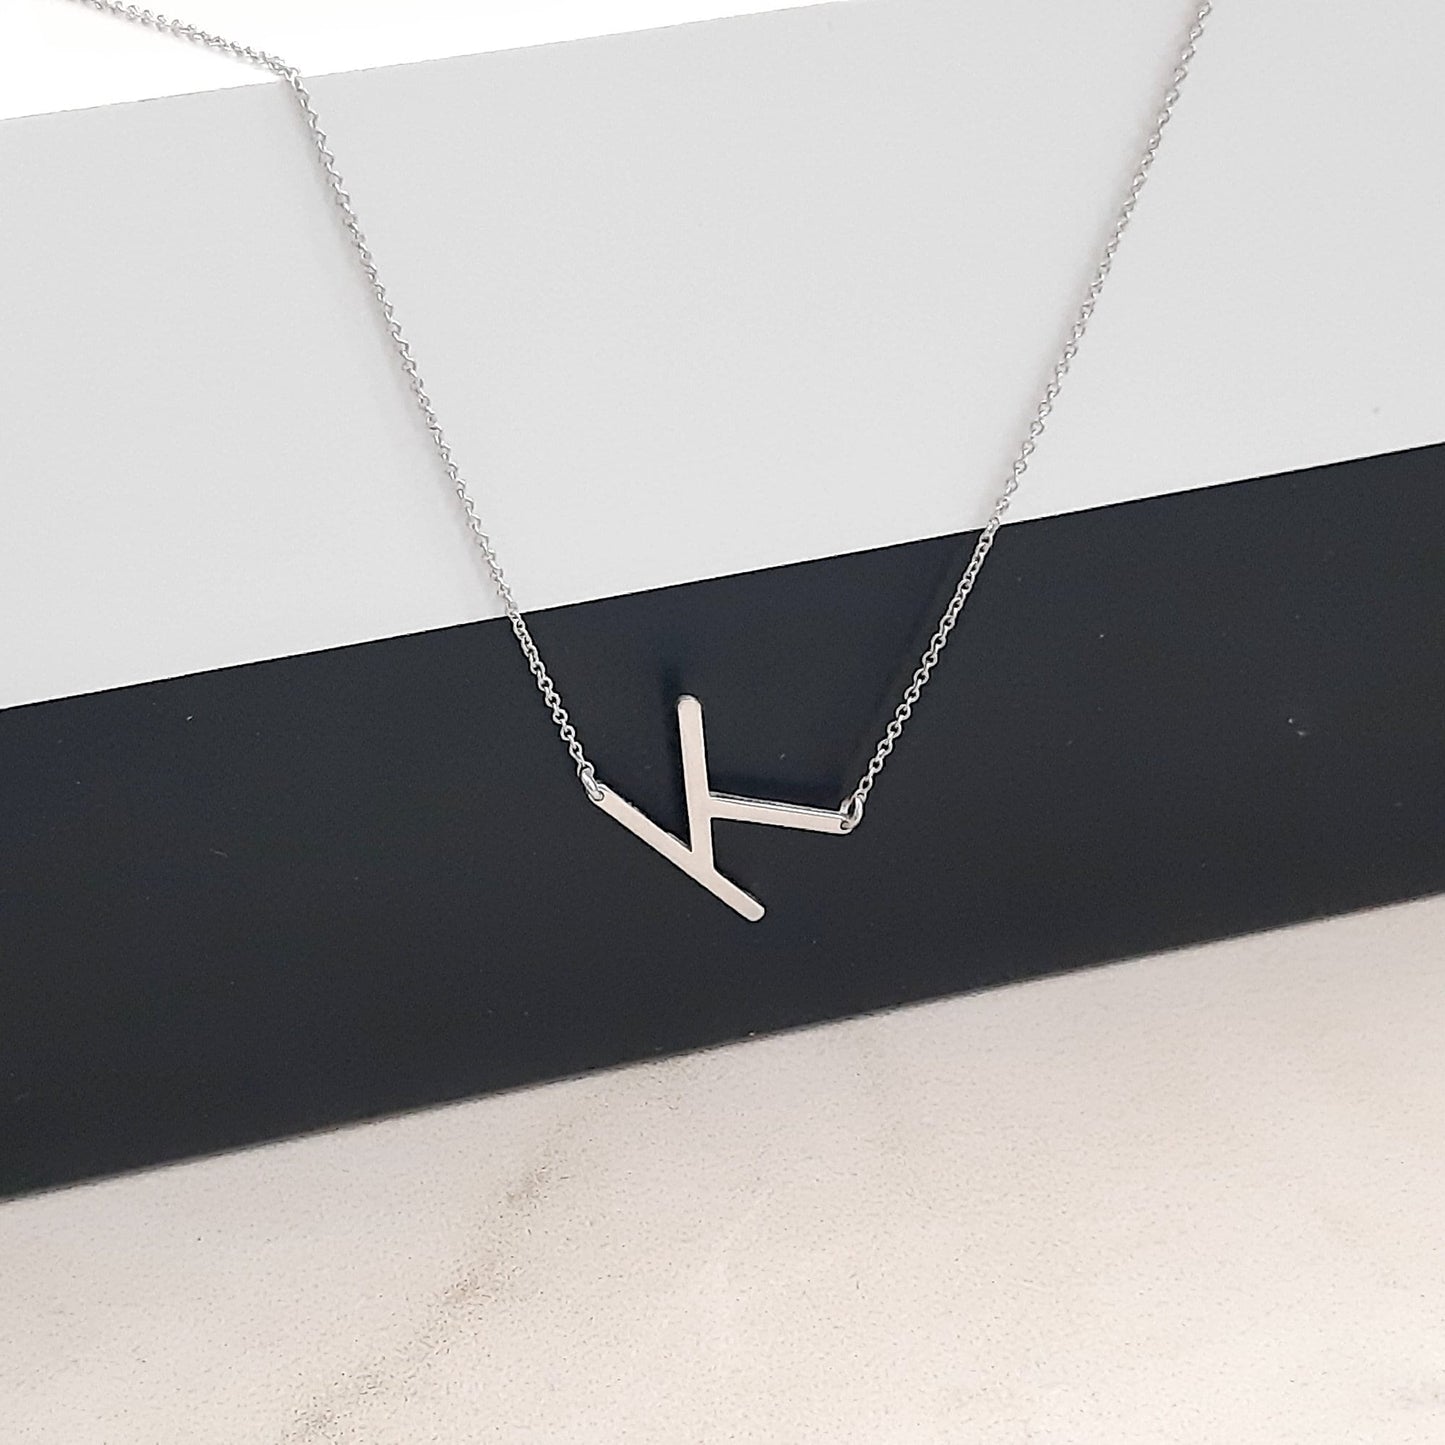 Dainty Initial Necklace, Gold Letter Necklace, Sideways Initial Necklace, Oversized Initial Necklace, Alphabet Necklace, Solid gold chain